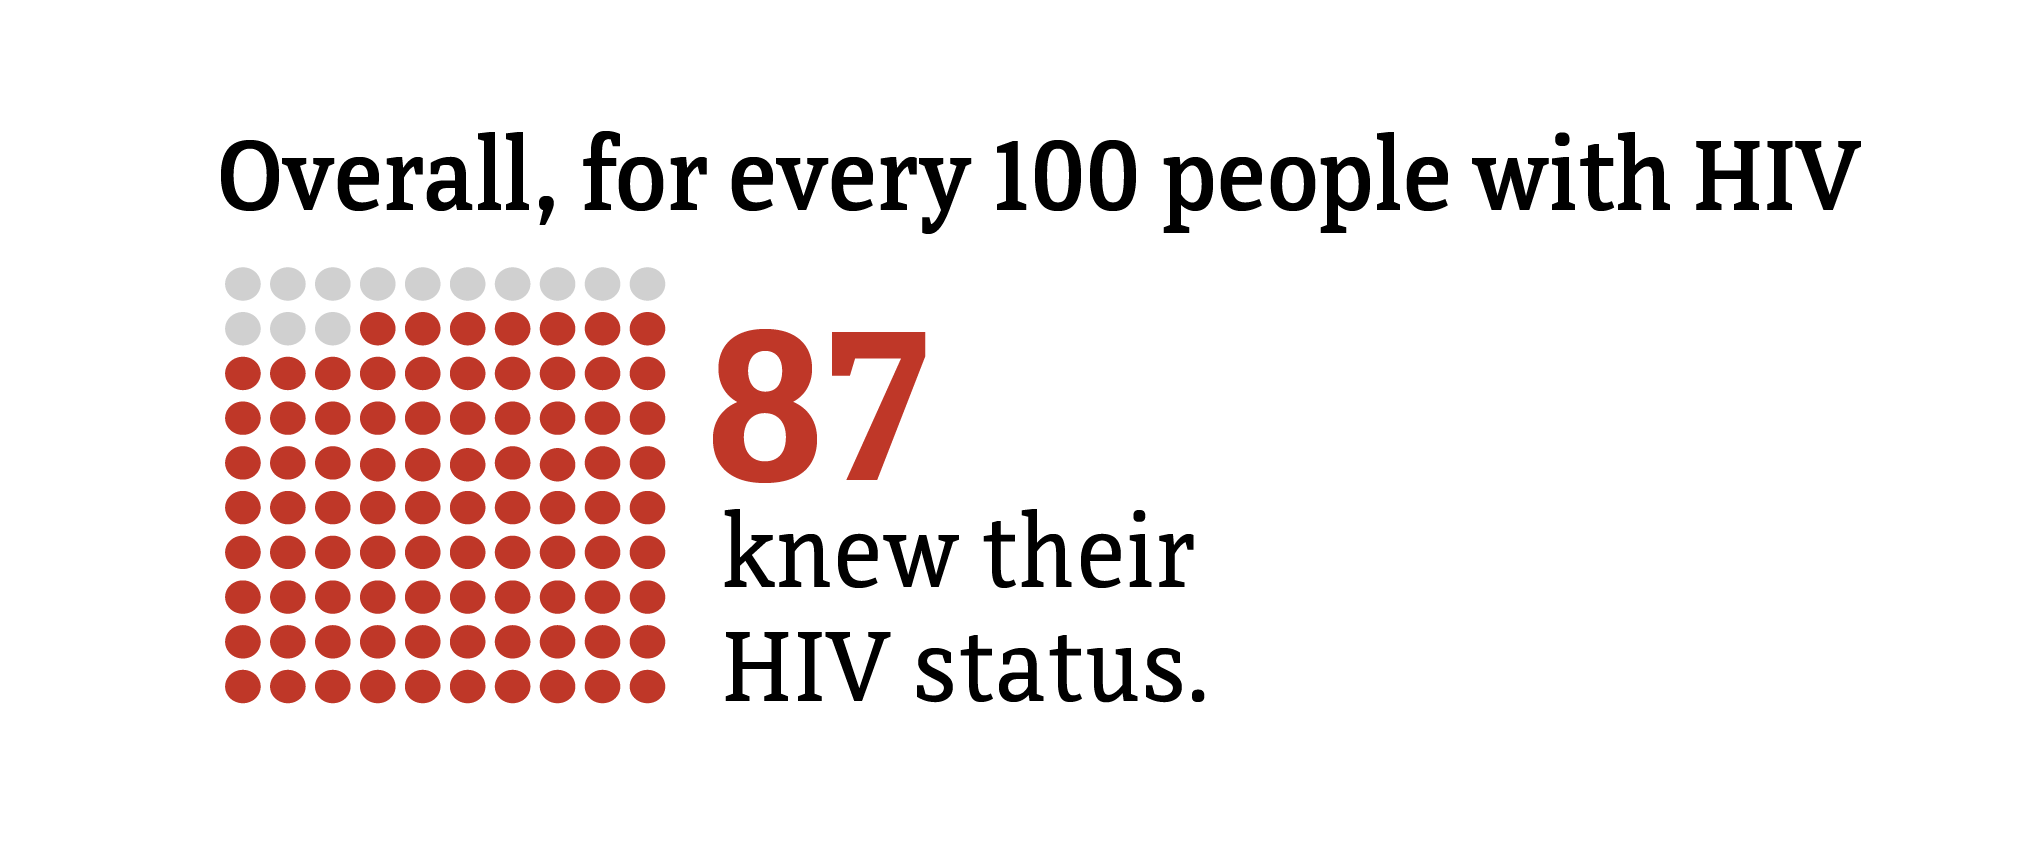 This chart shows the proportion of people with HIV in the US who knew their HIV status.